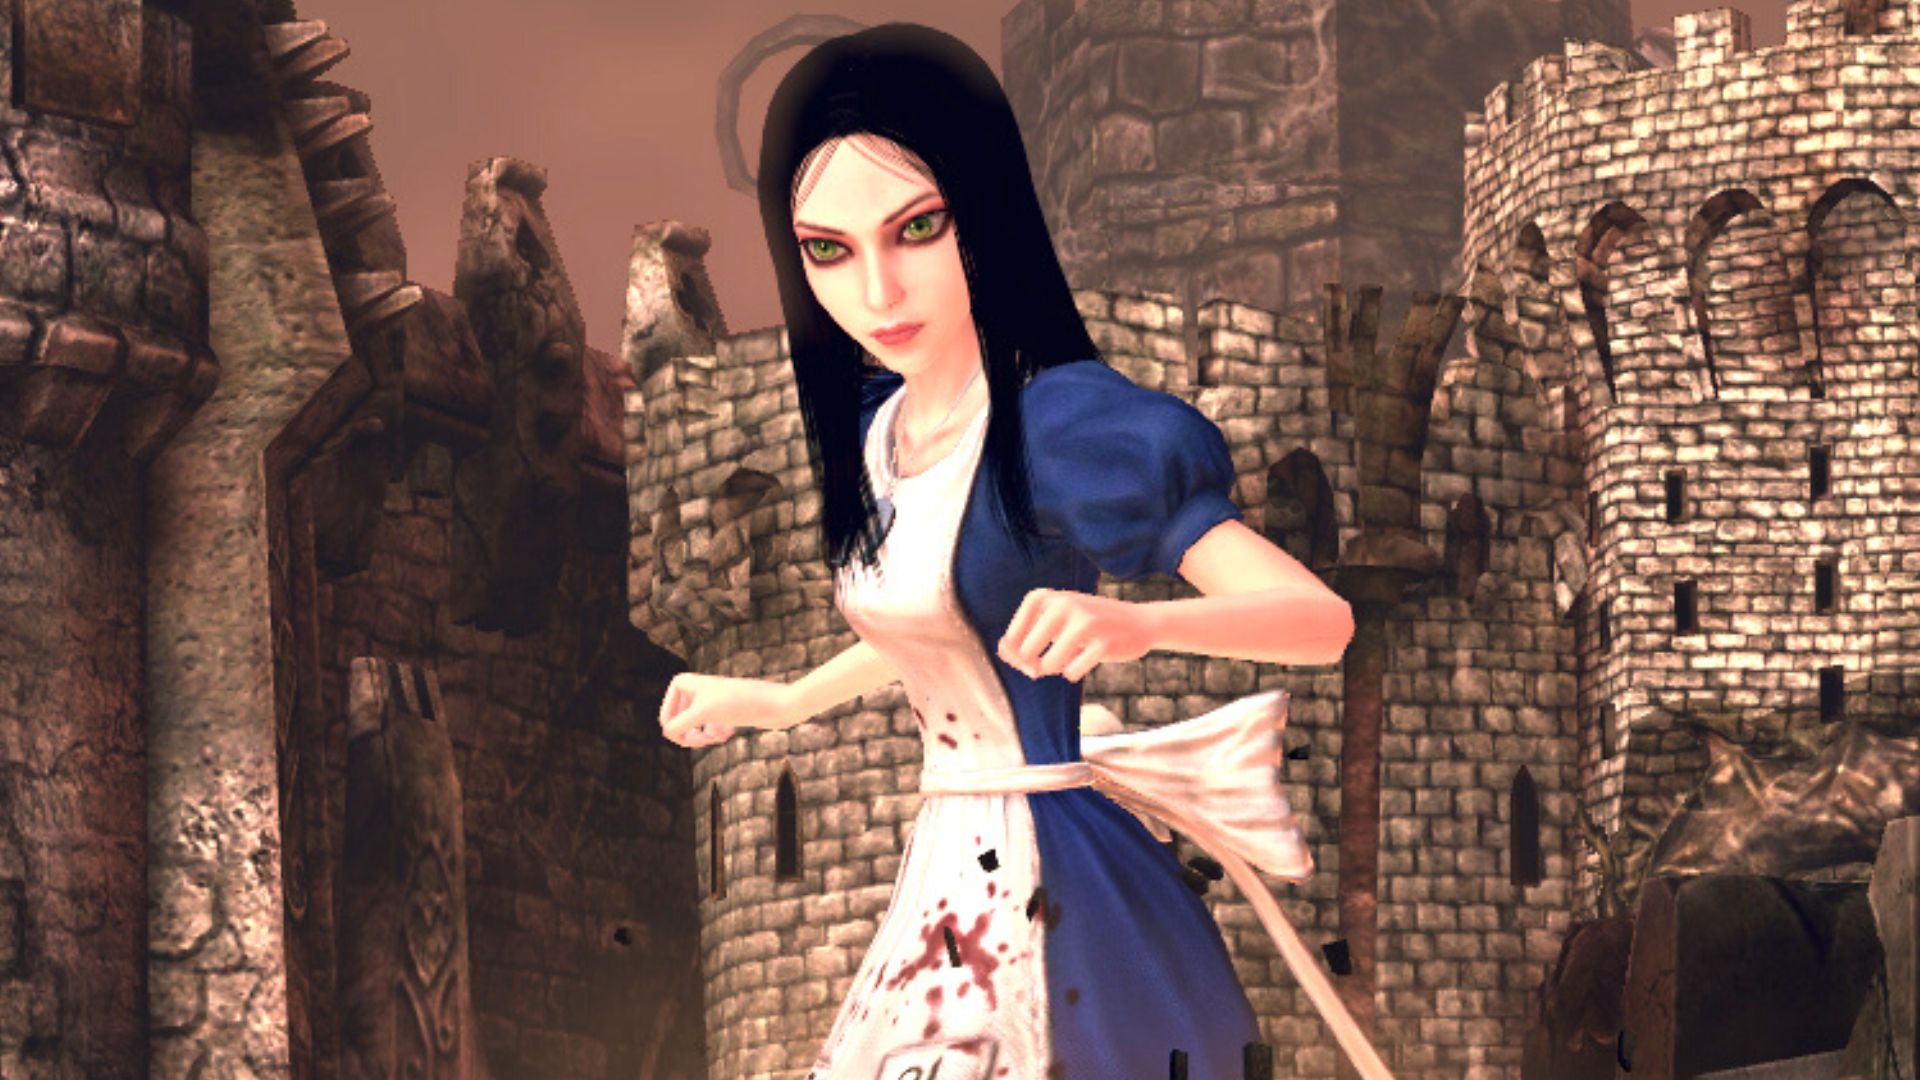 Alice: Madness Returns - The Complete Collection - PC EA app